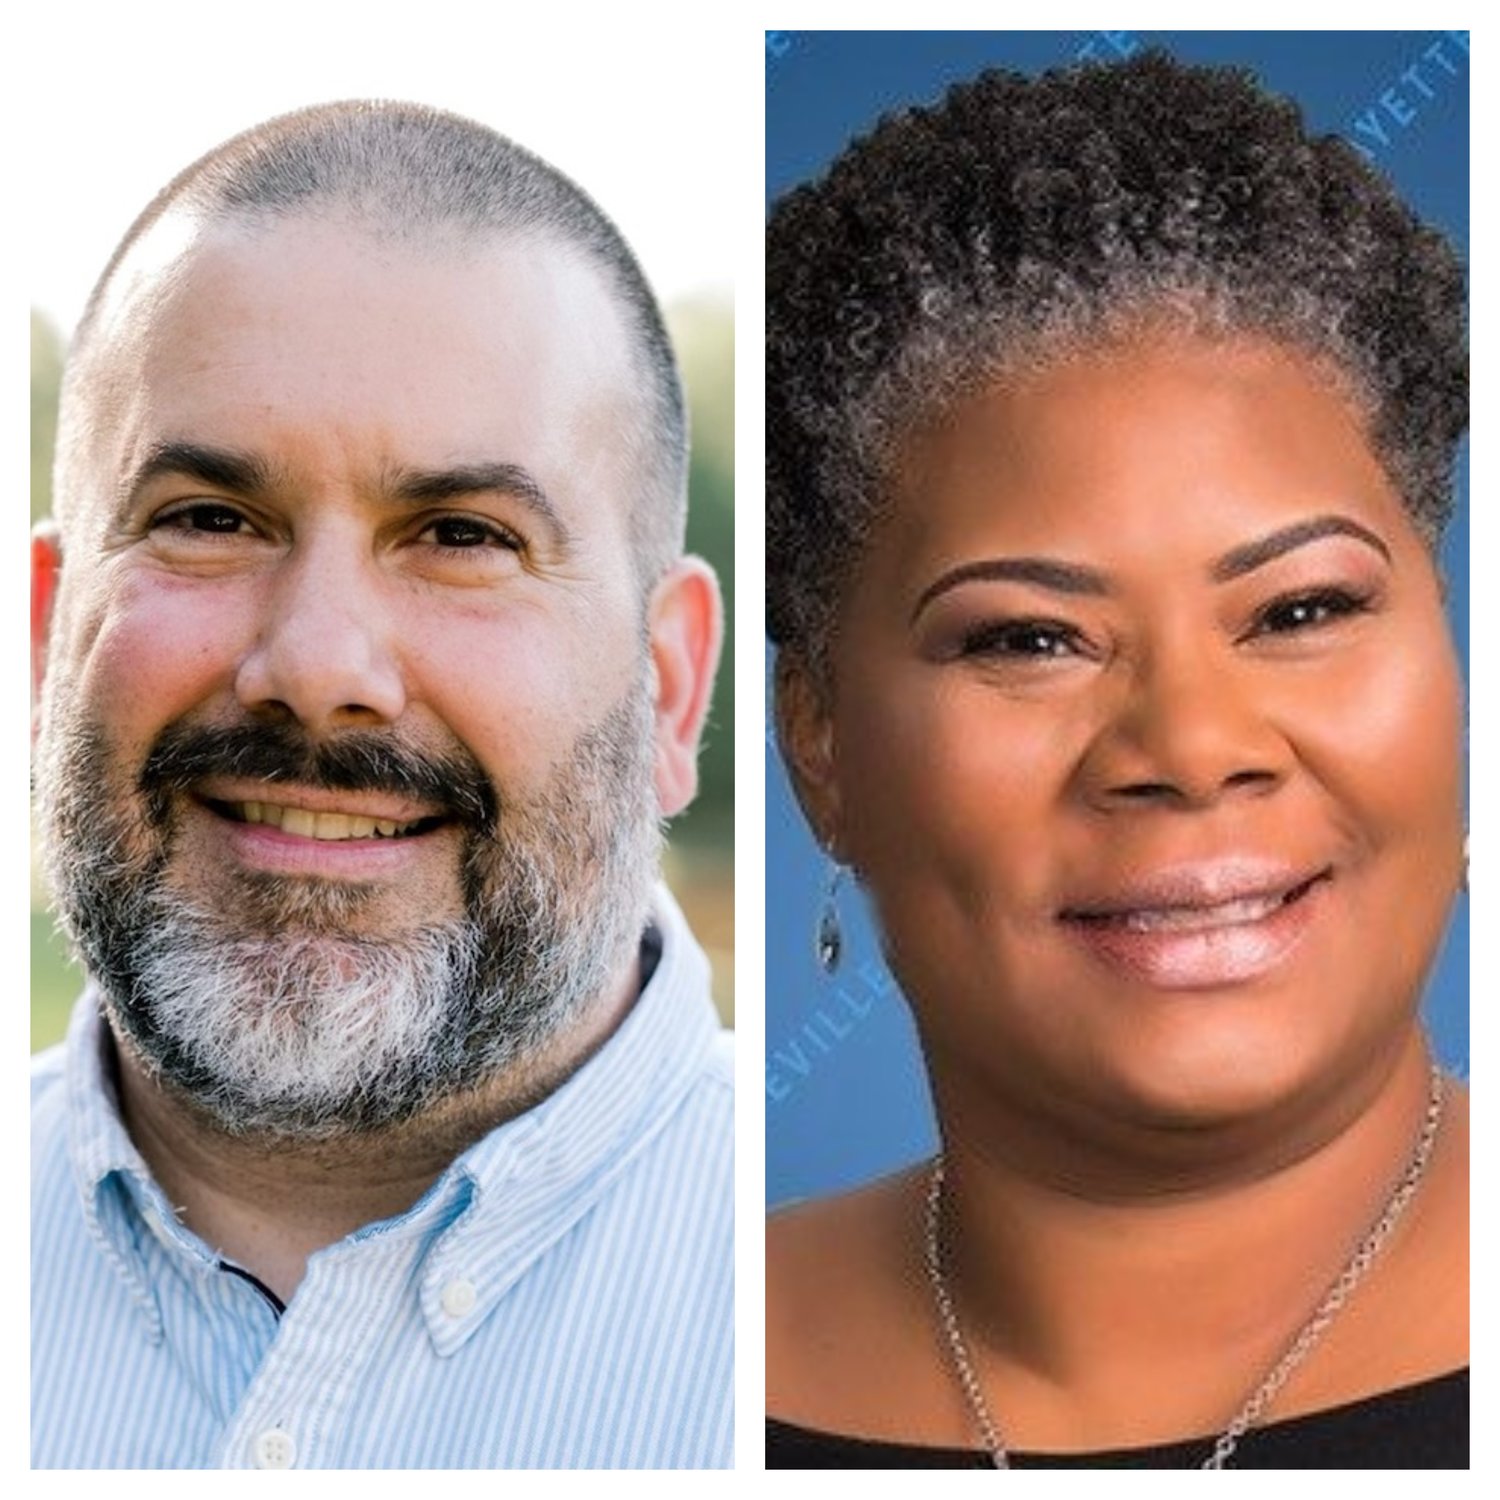 Deno Hondros on Tuesday defeated incumbent Yvonne Kinston for the District 9 seat on the Fayetteville City Council, according to unofficial returns.